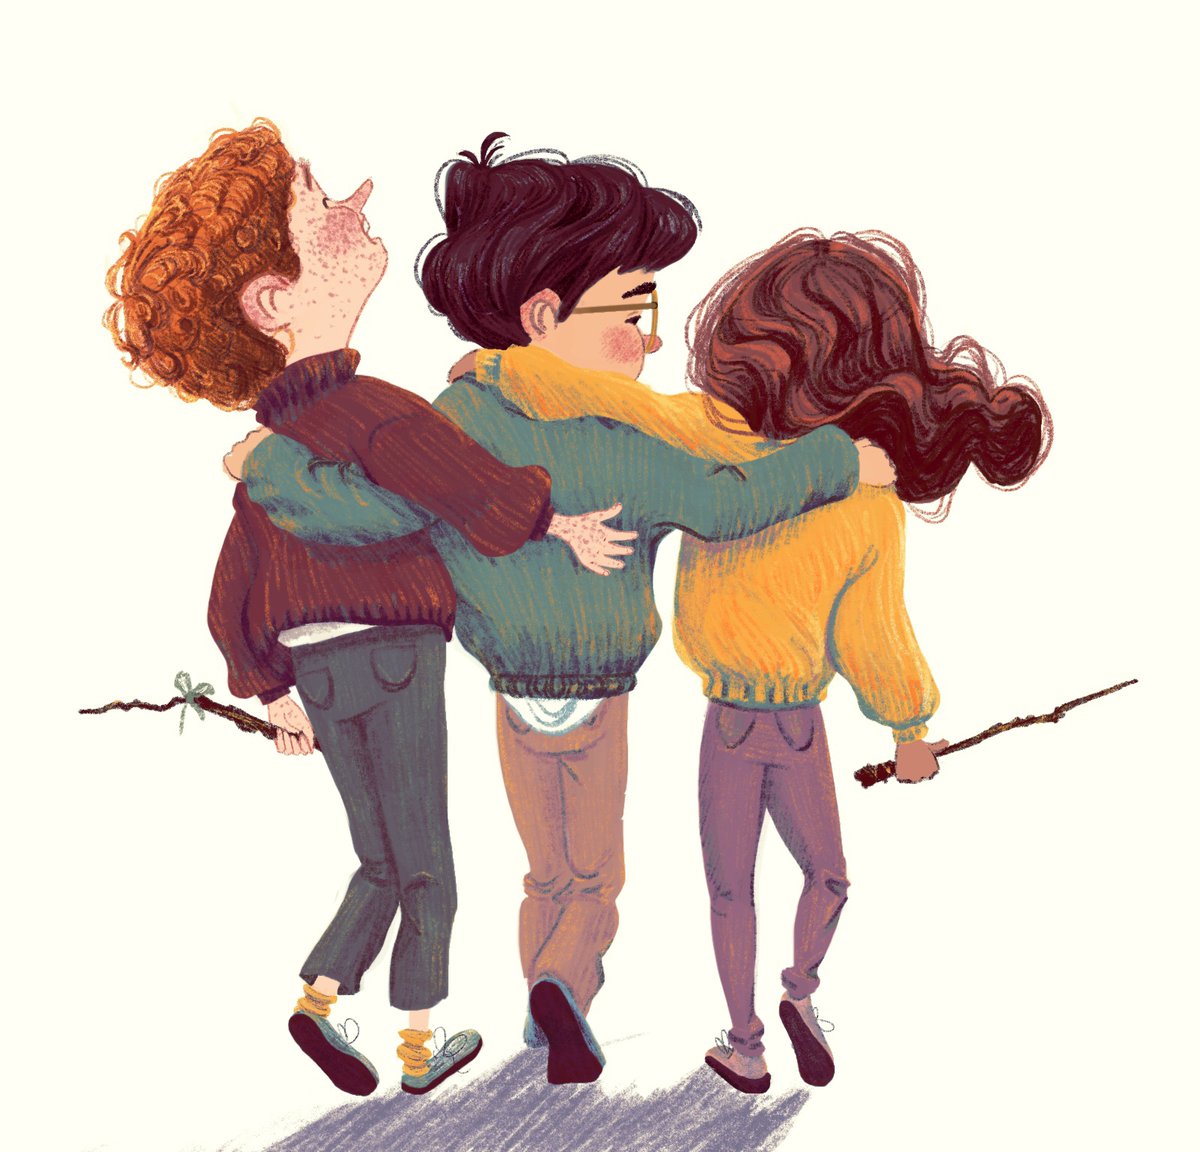 Happy Belated #worldbookday in the US! Here is my absolute favorite trio. Without them, I doubt I'd be making books today. #harrypotter #bestfriends #magic #bookmagic #kidlitart